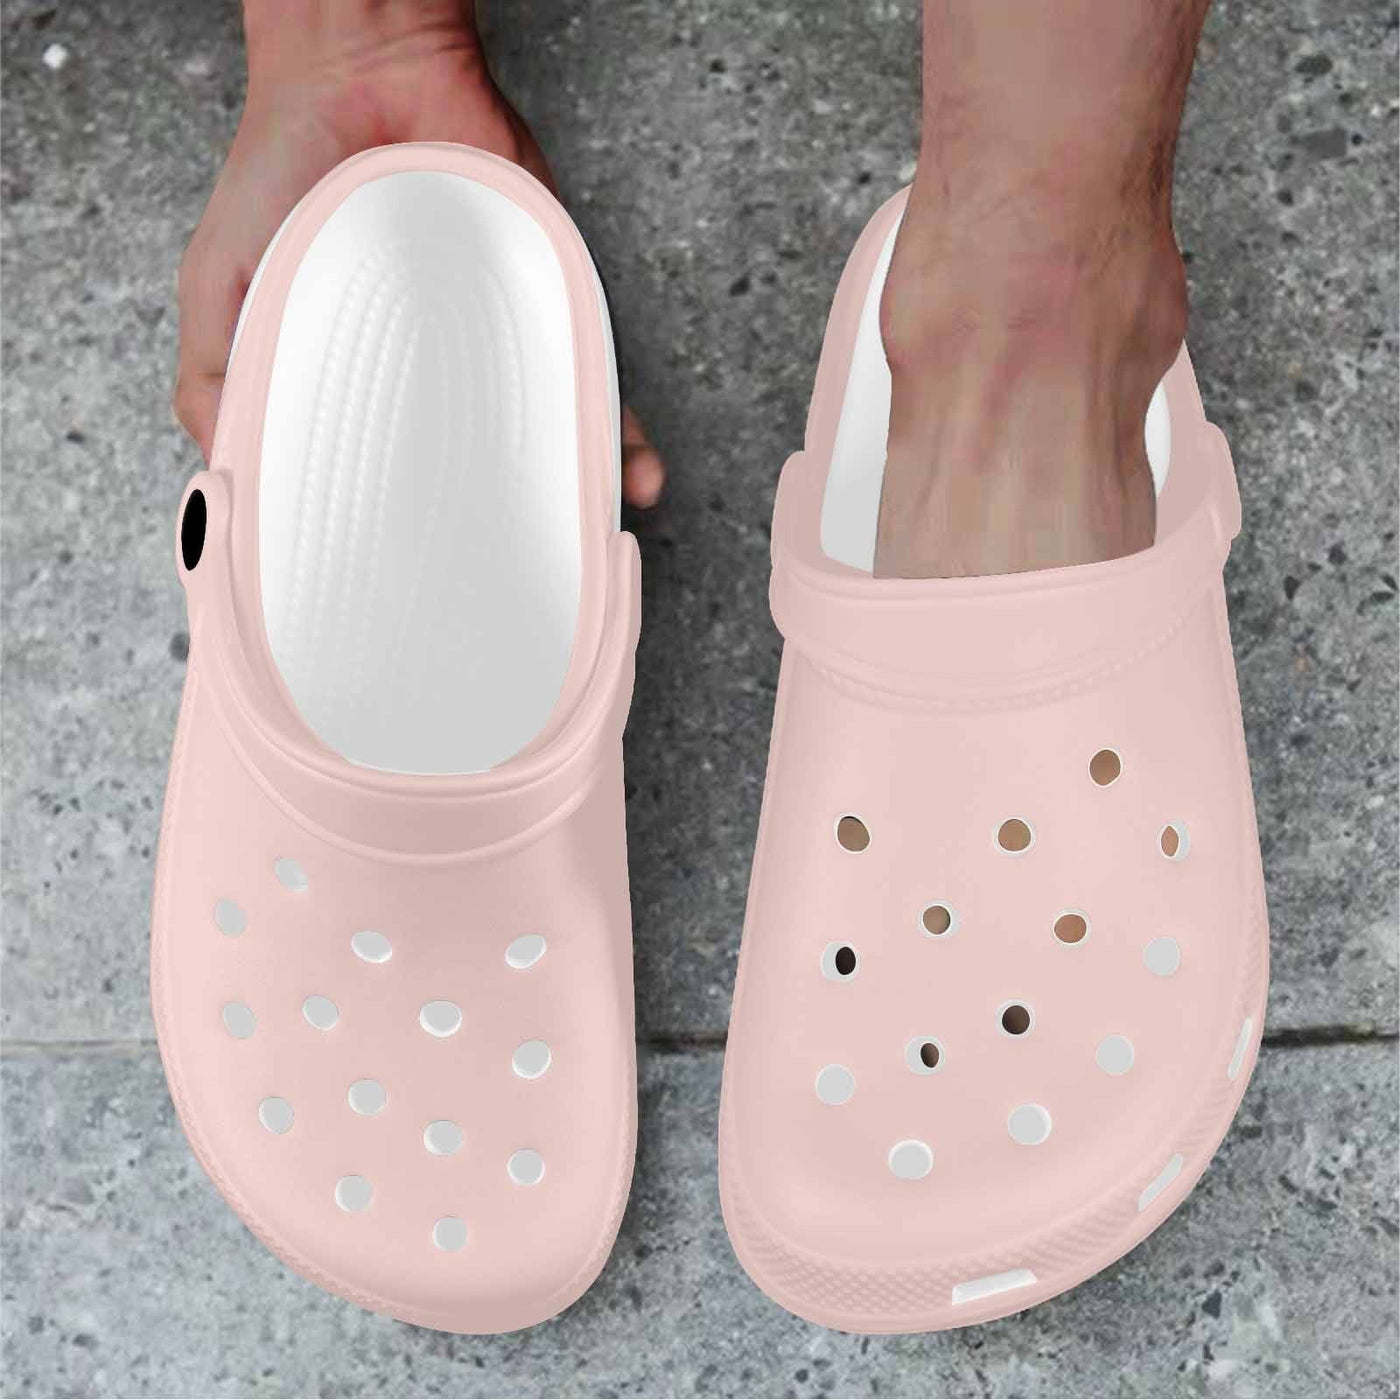 Scallop Seashell Pink Adult Clogs - Unisex | Clogs | Adults